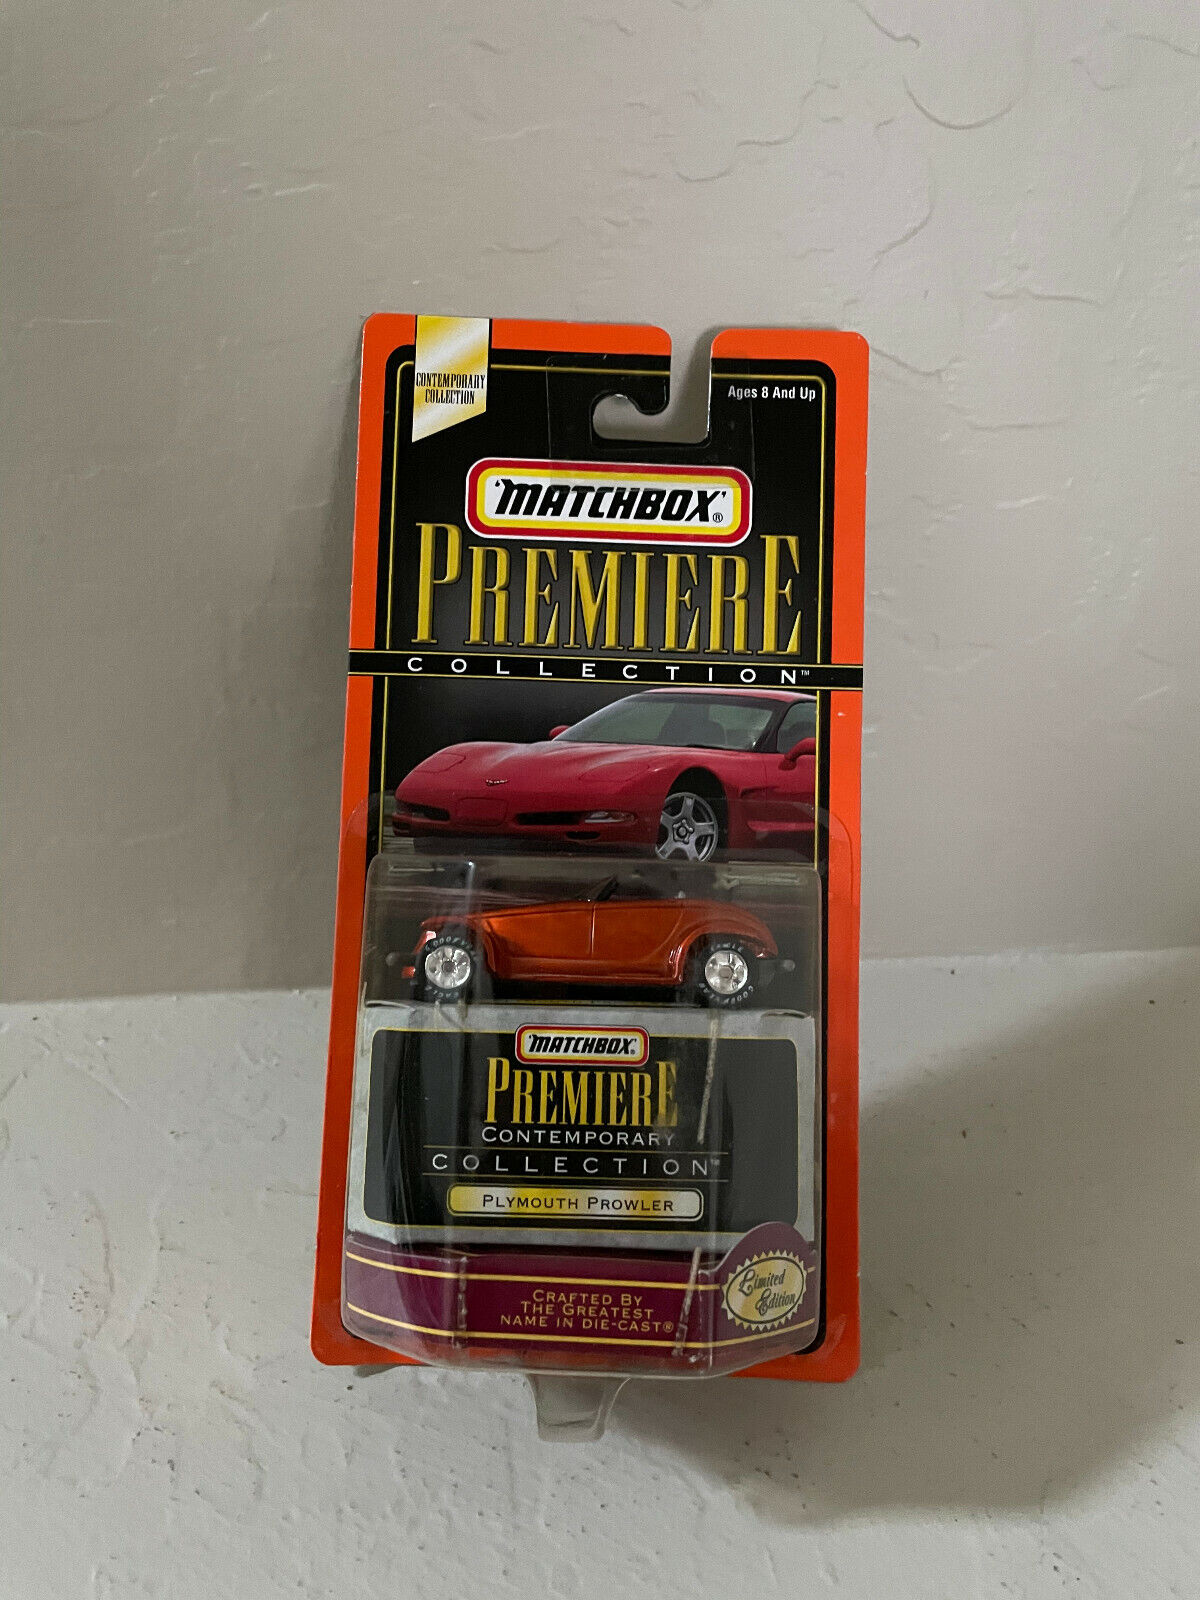 Matchbox Premiere Contemporary Collection Plymouth Prowler D15!